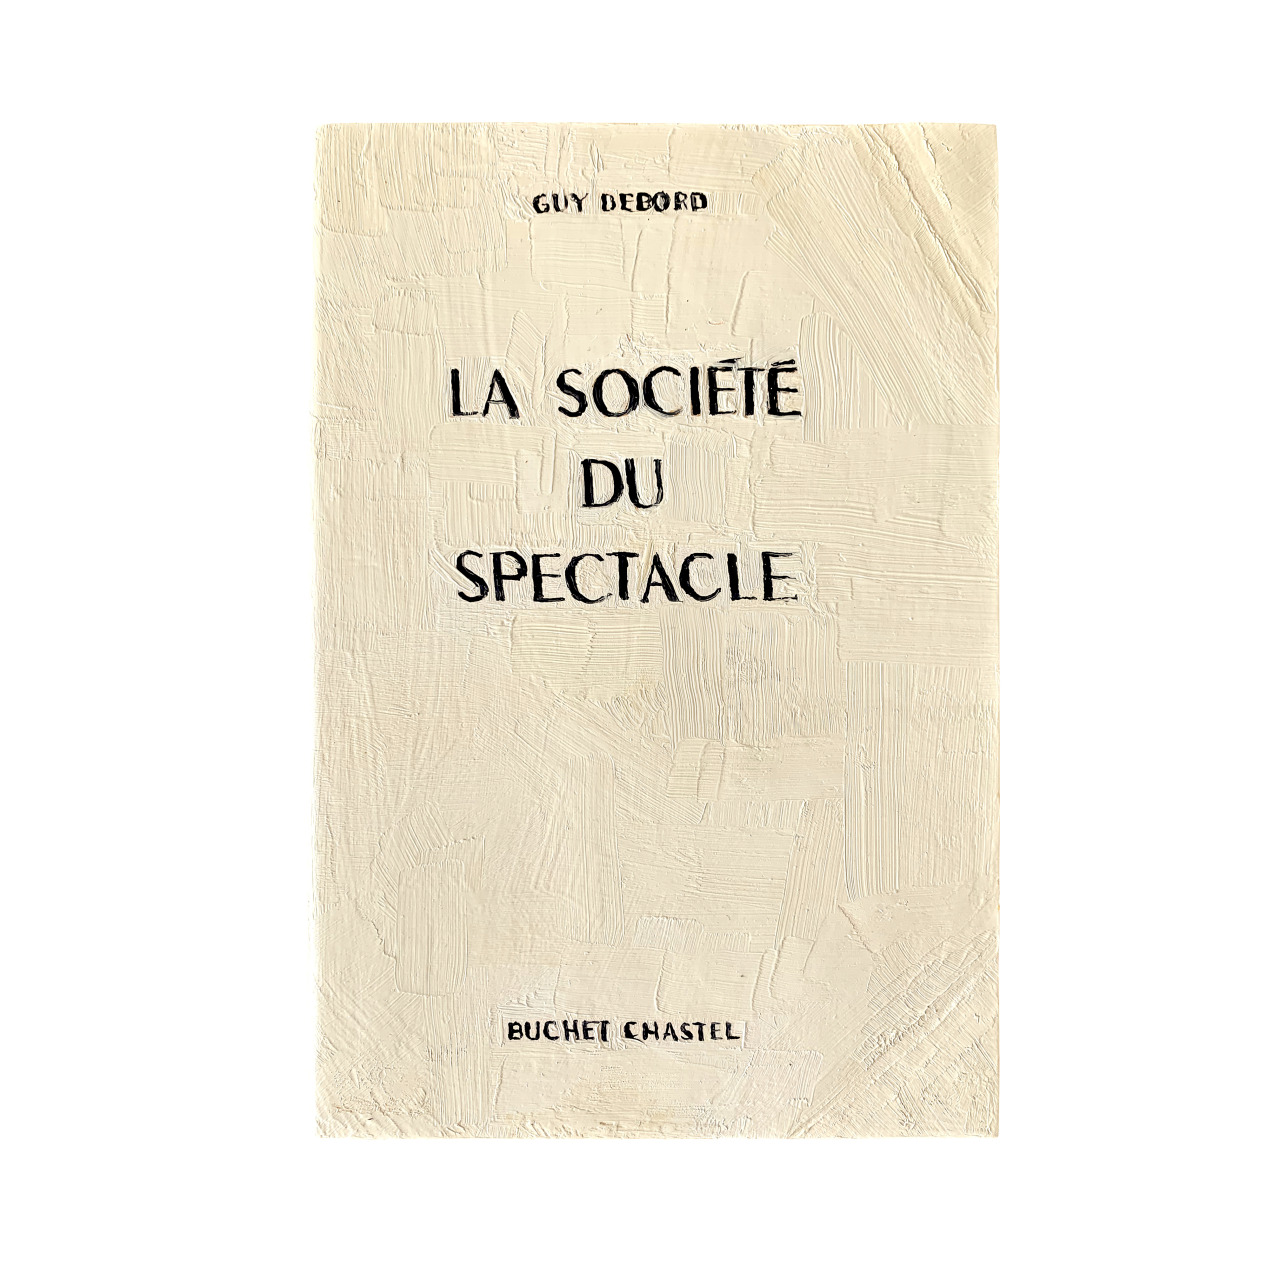 UNTITLED PROJECT: LA SOCIÉTÉ DU SPECTACLE, Oil paint on carved wood, 2021 >> a carved and painted book/sculpture of Guy Debord’s seminal text, The Society of the Spectacle, based on a highly-collectible, first-edition copy from 1967. This...